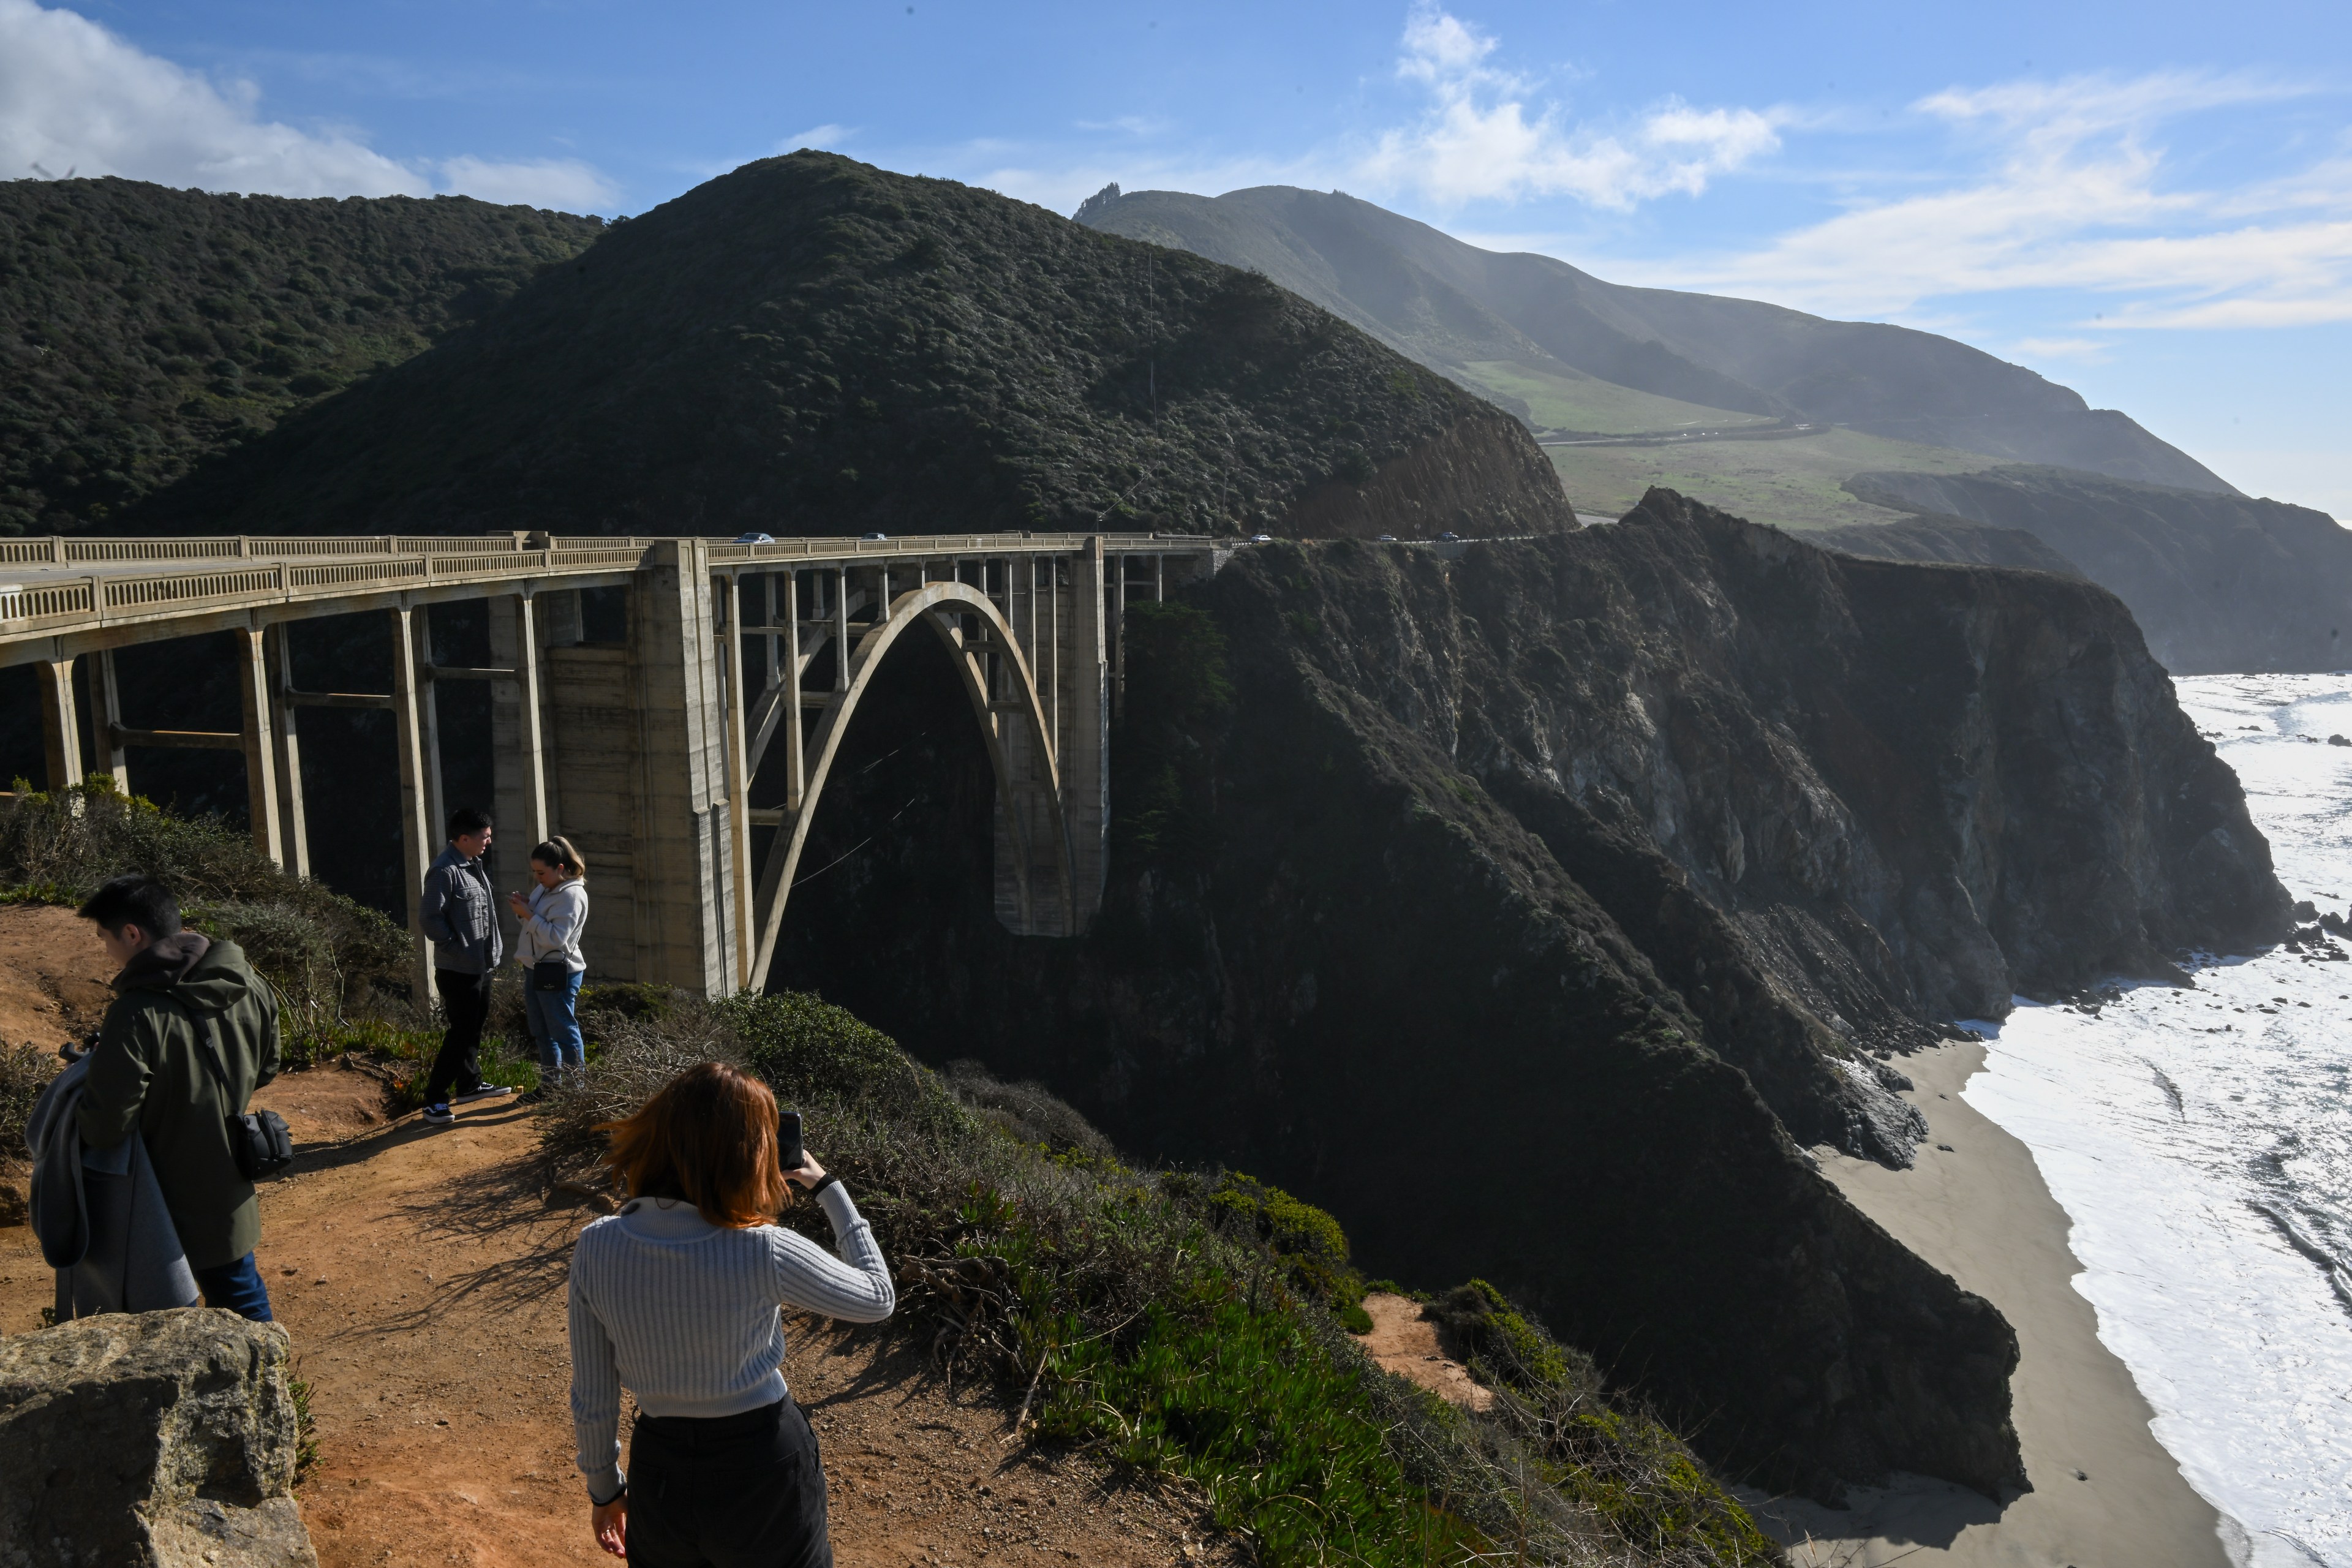 Bixby Bridge in the background and people in the foreground taking pictures and posing right next to the clif.